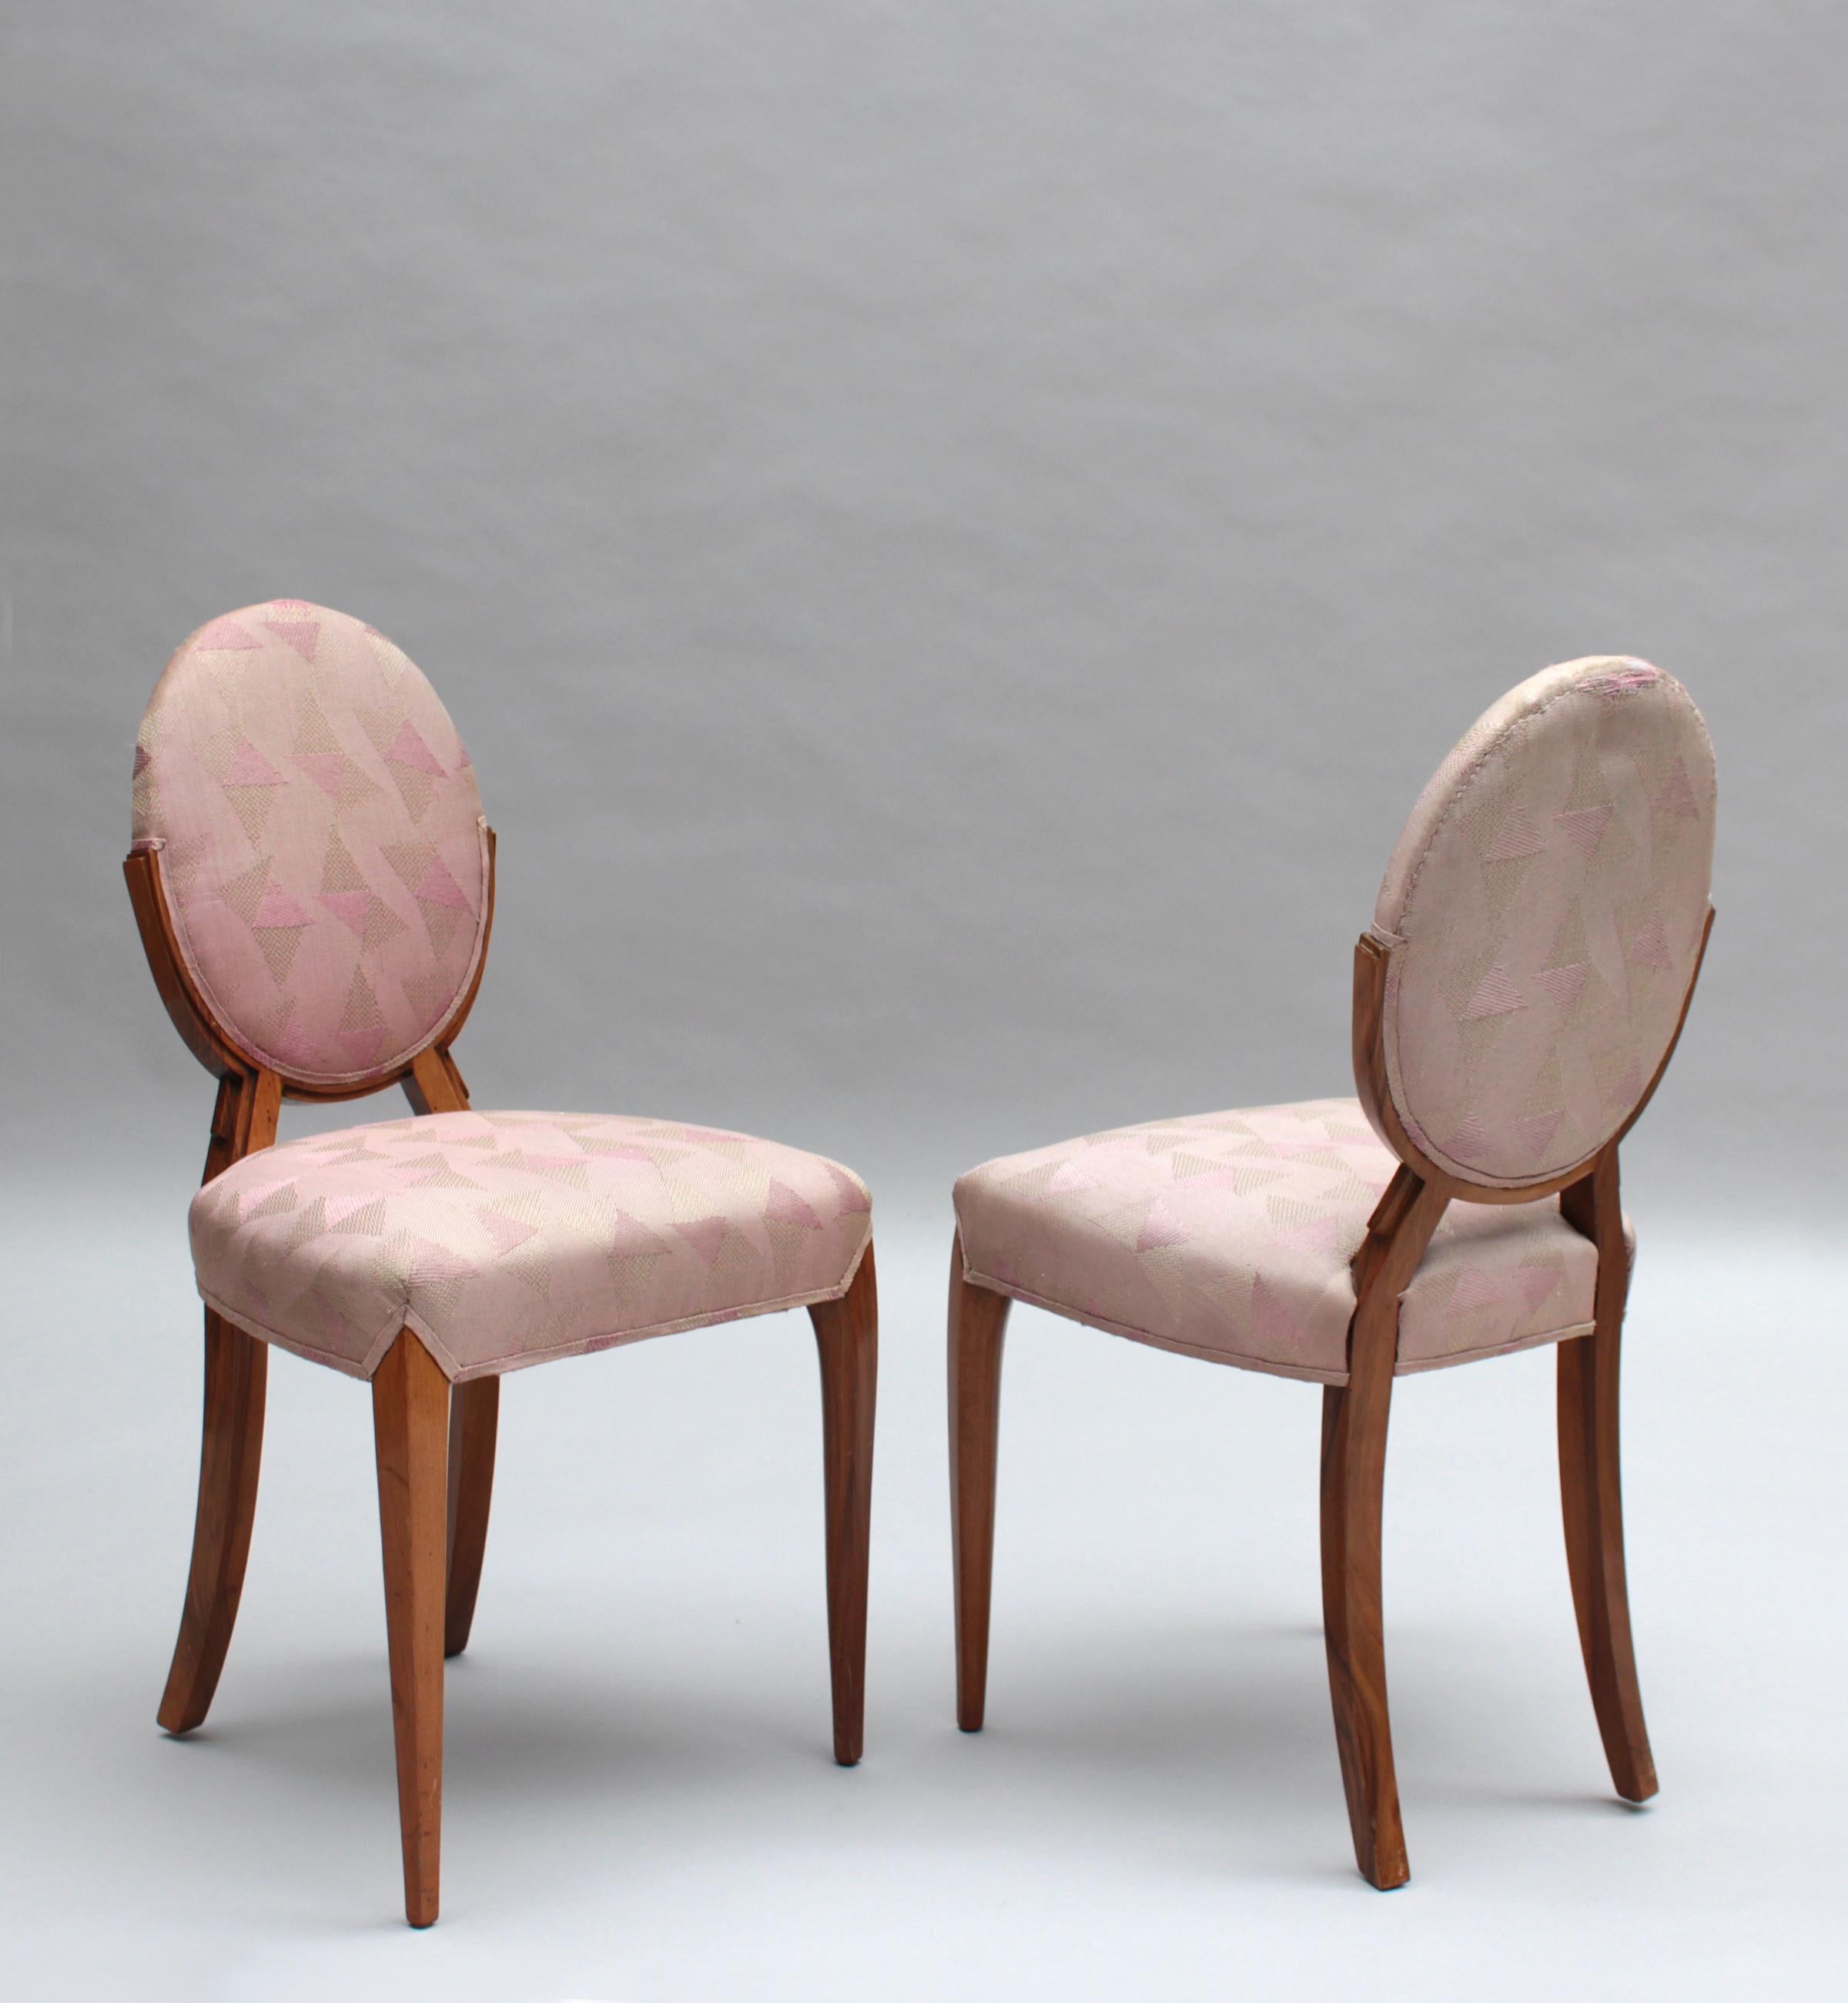 Fabric A Pair of Fine French Art Deco Walnut Side Chairs by D.I.M